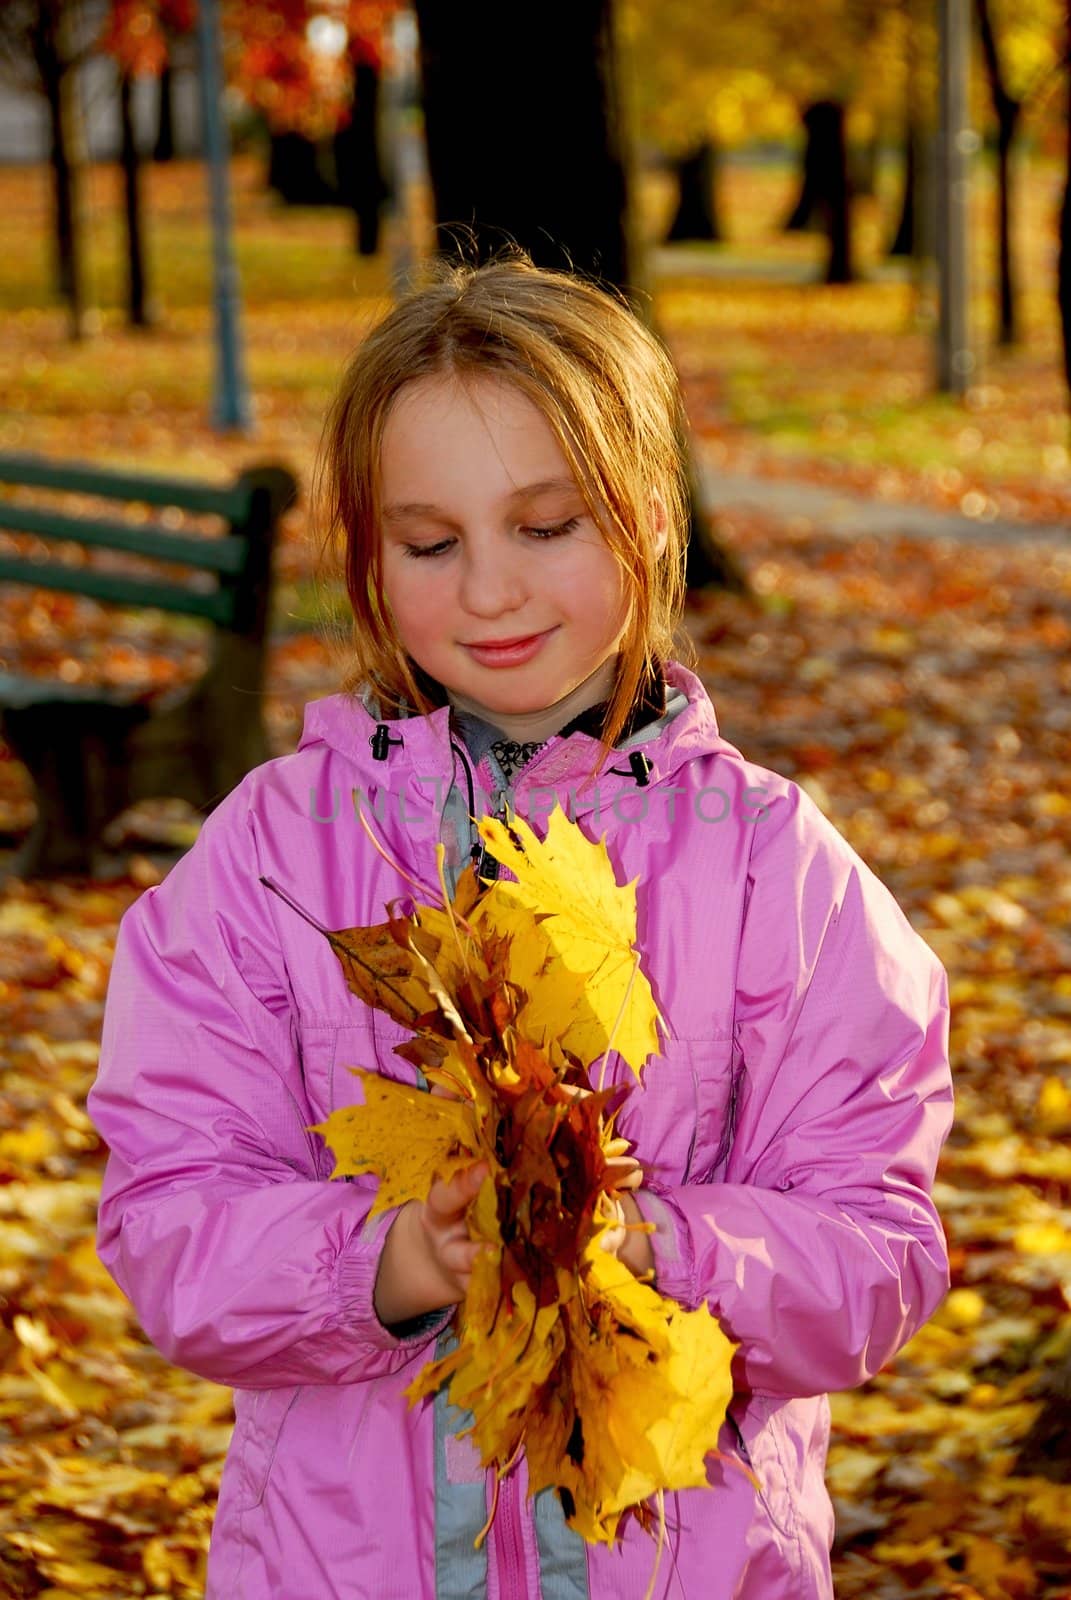 Portrait of a young girl holding autumn leaves